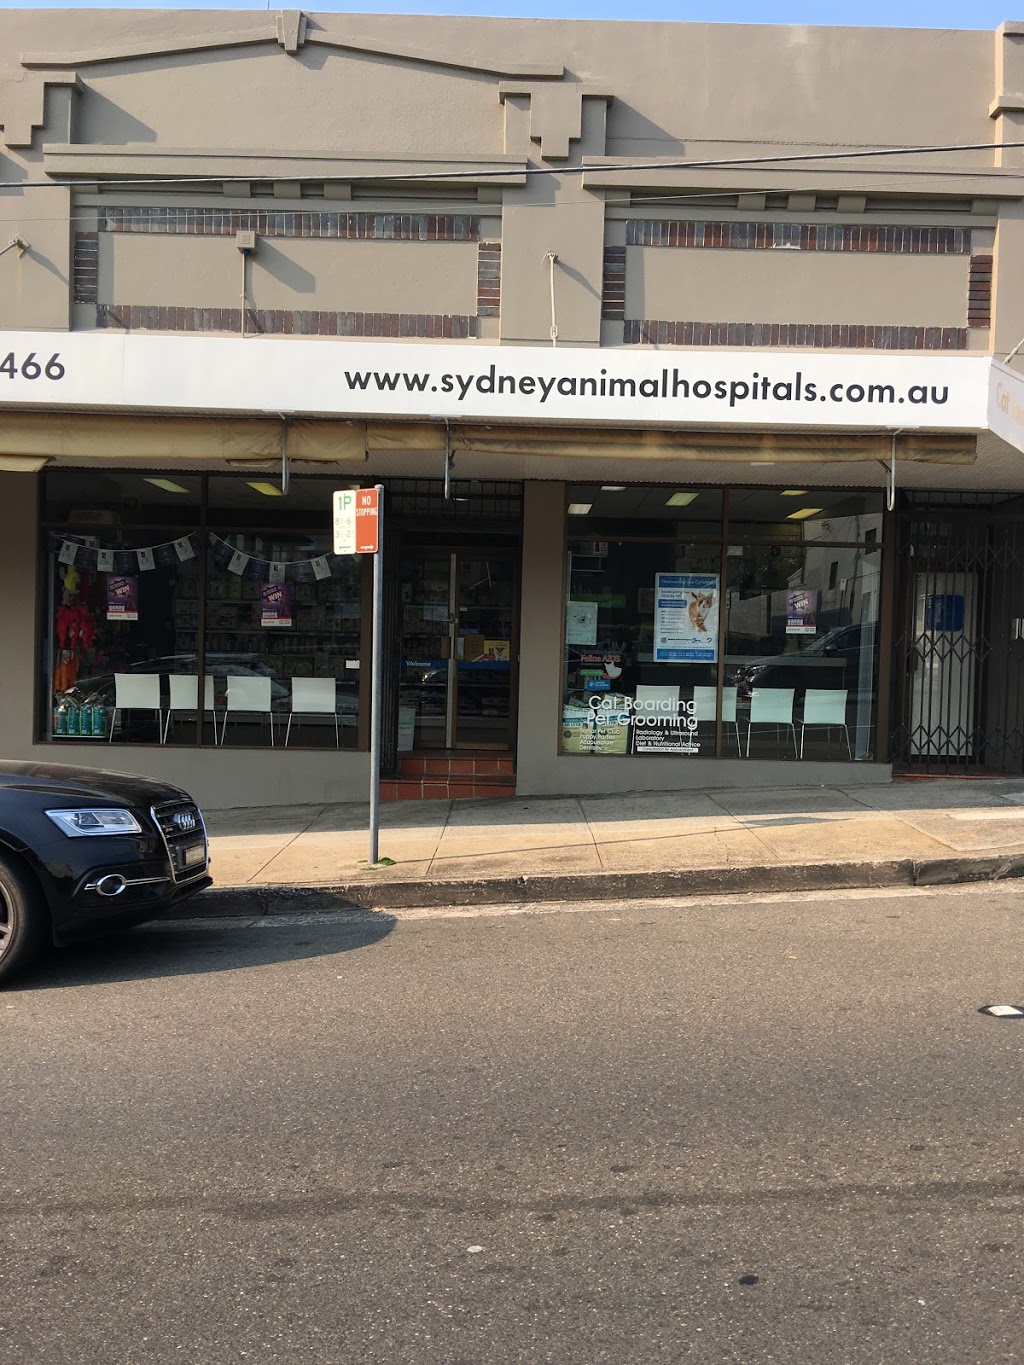 Sydney Animal Hospitals Inner West | veterinary care | 1A Northumberland Ave, Stanmore NSW 2048, Australia | 0295161466 OR +61 2 9516 1466